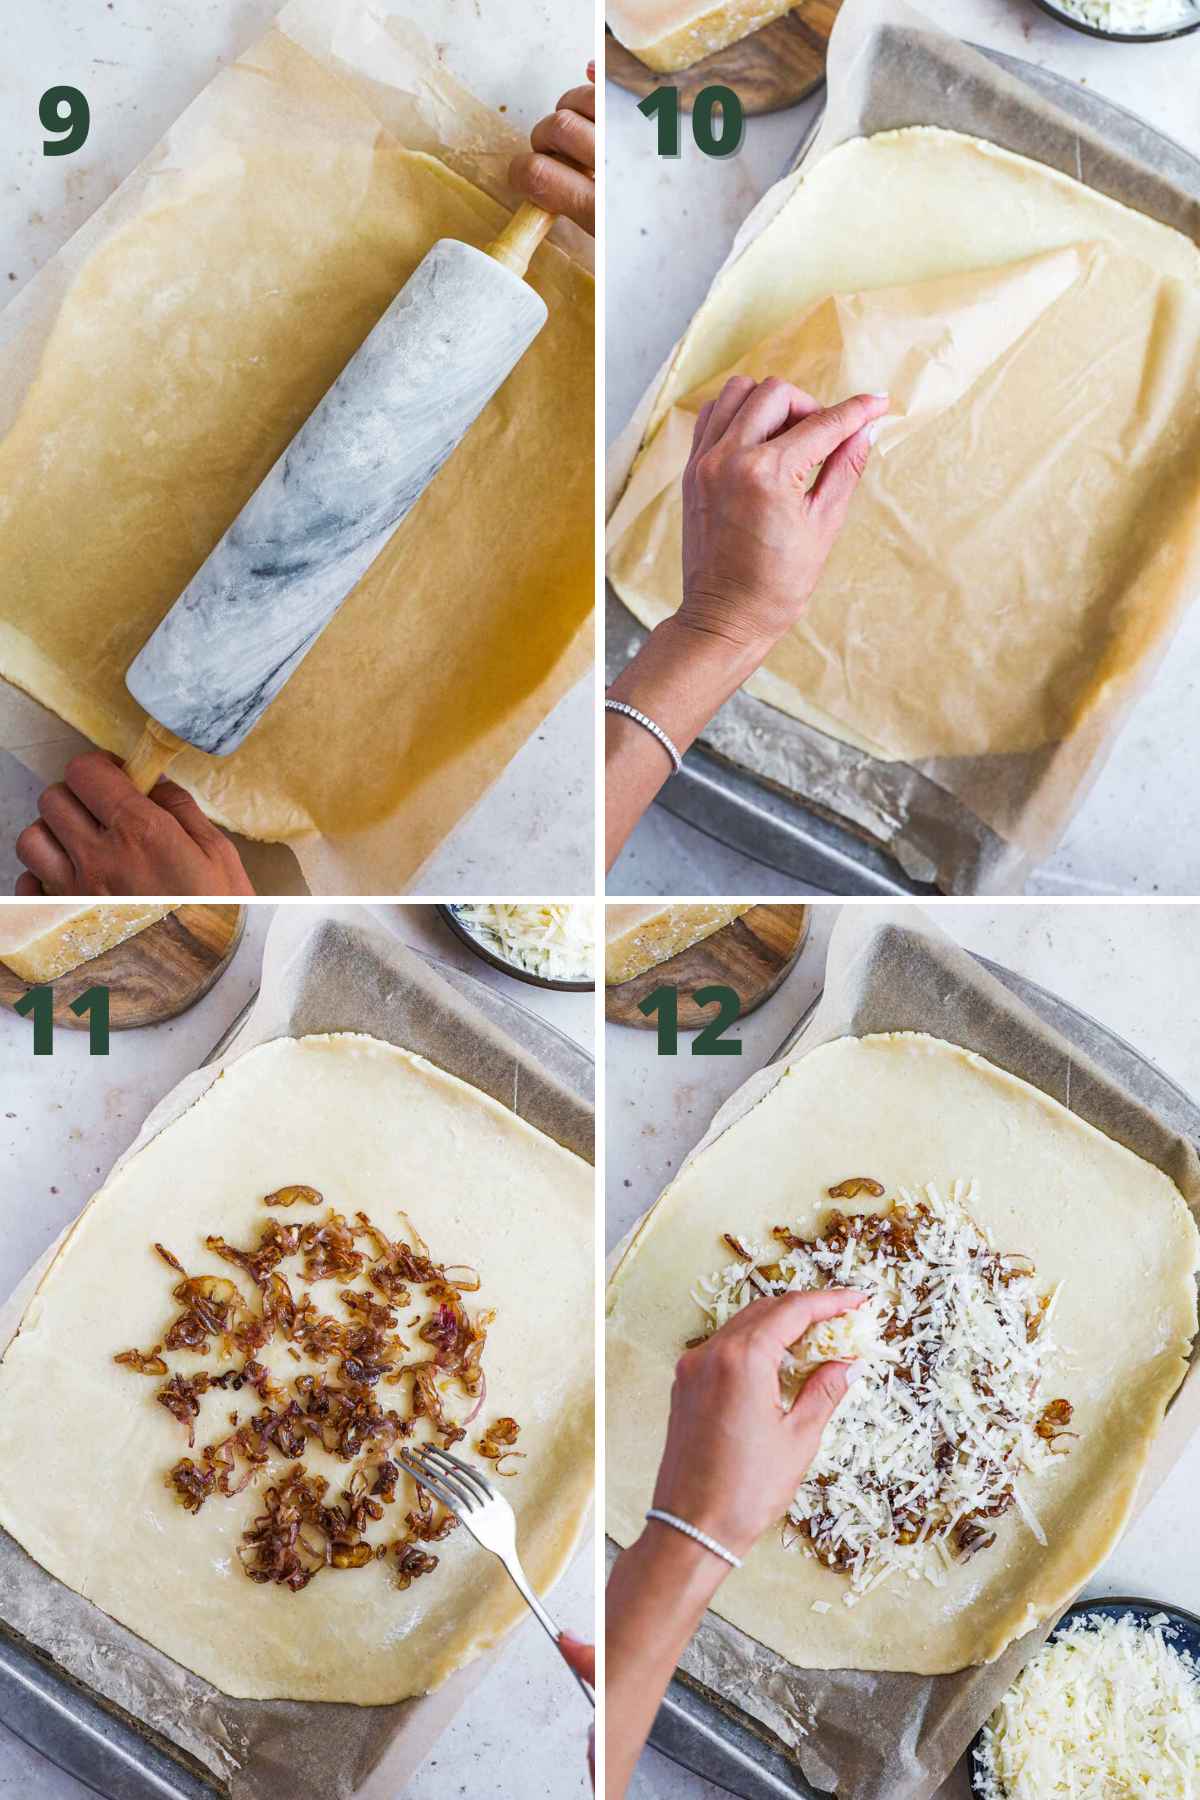 Steps to make crispy pancetta guanciale and potato crostata, including rolling out the dough, adding the caramelized shallots, and layering the cheese.